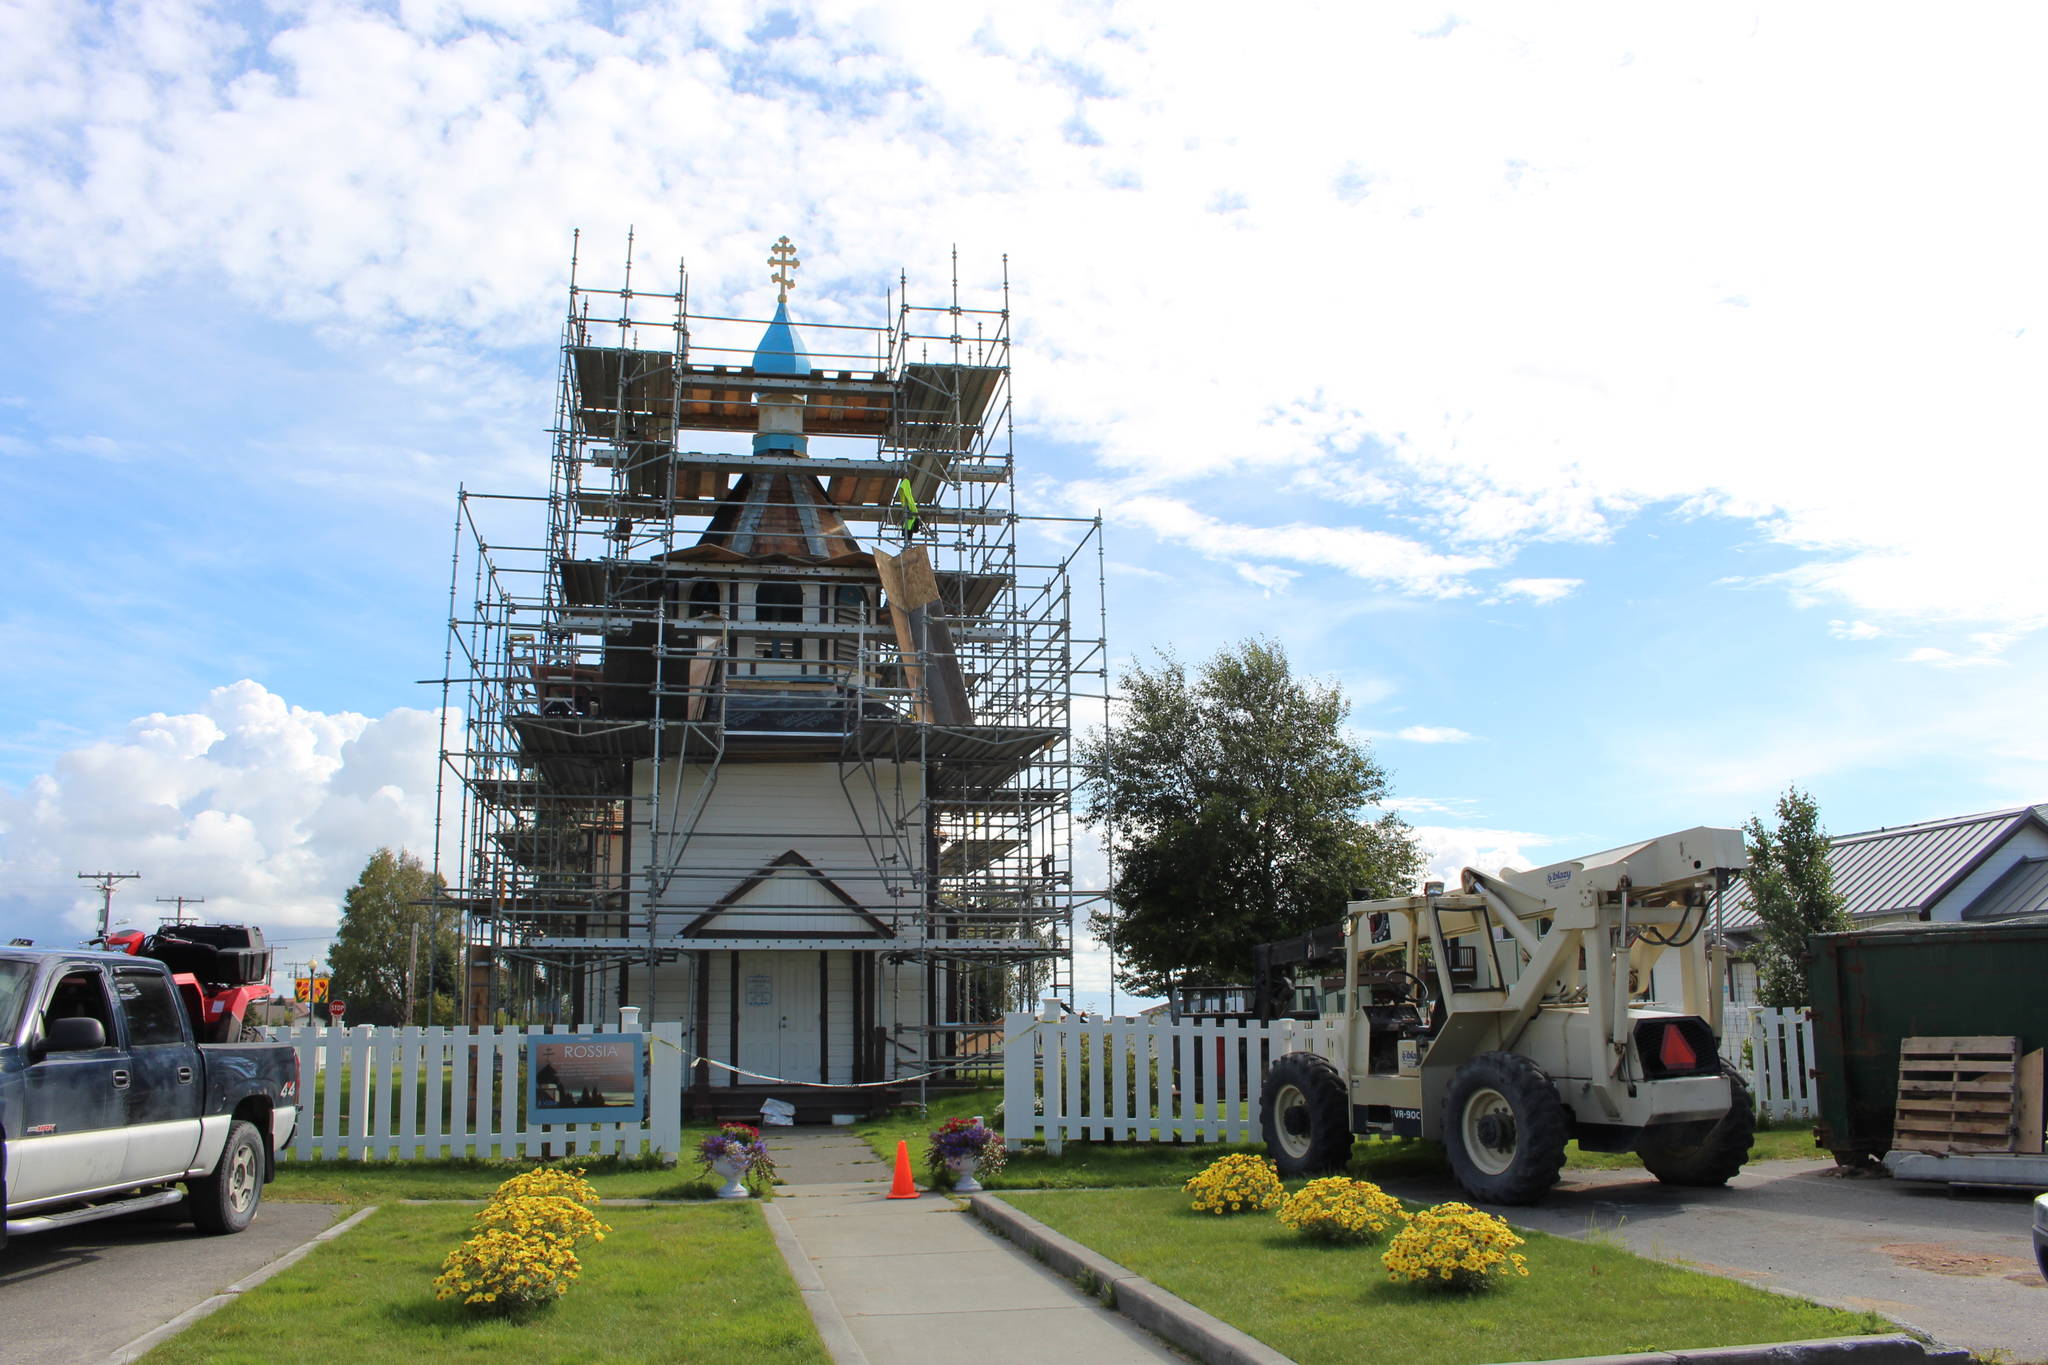 The construction efforts on the Church of the Holy Assumption of the Virgin Mary are seen here in Kenai, Alaska on Sept. 1, 2020. (Photo by Brian Mazurek/Peninsula Clarion)